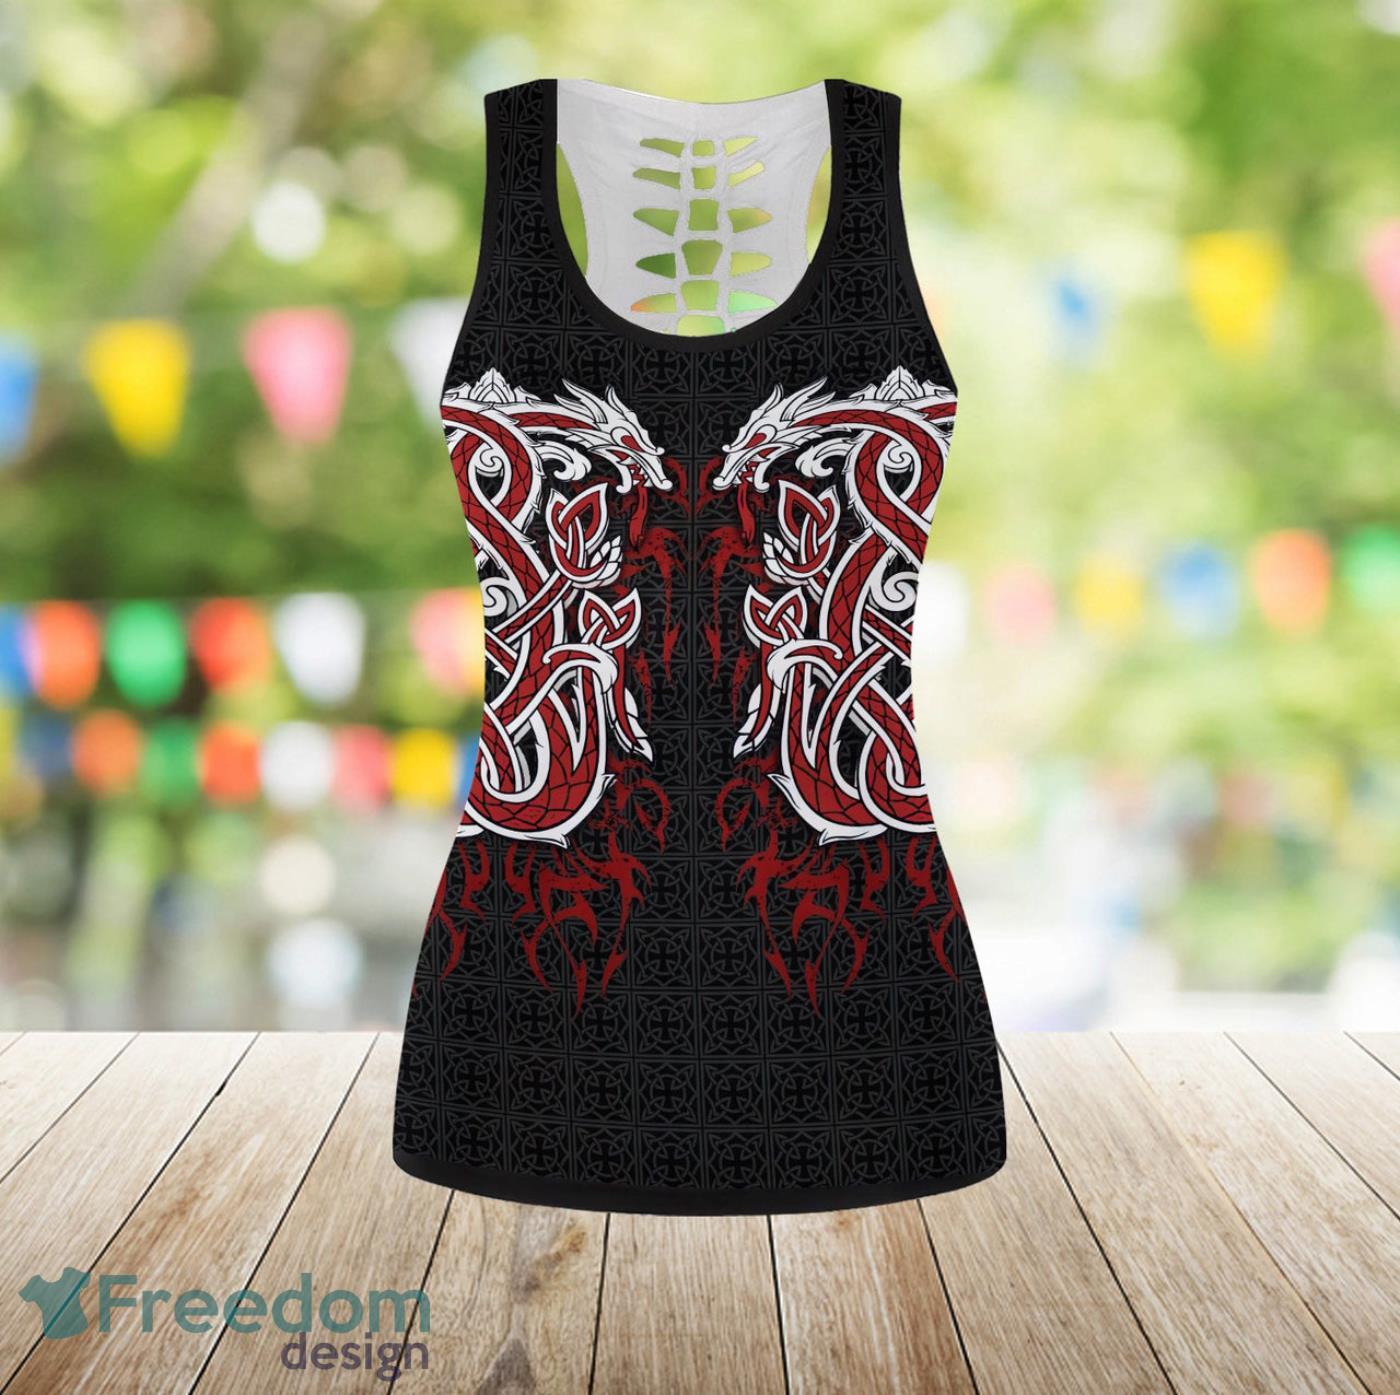 Dragon Tattoo Legging And Hollow Tank Top Gift For Women - Freedomdesign